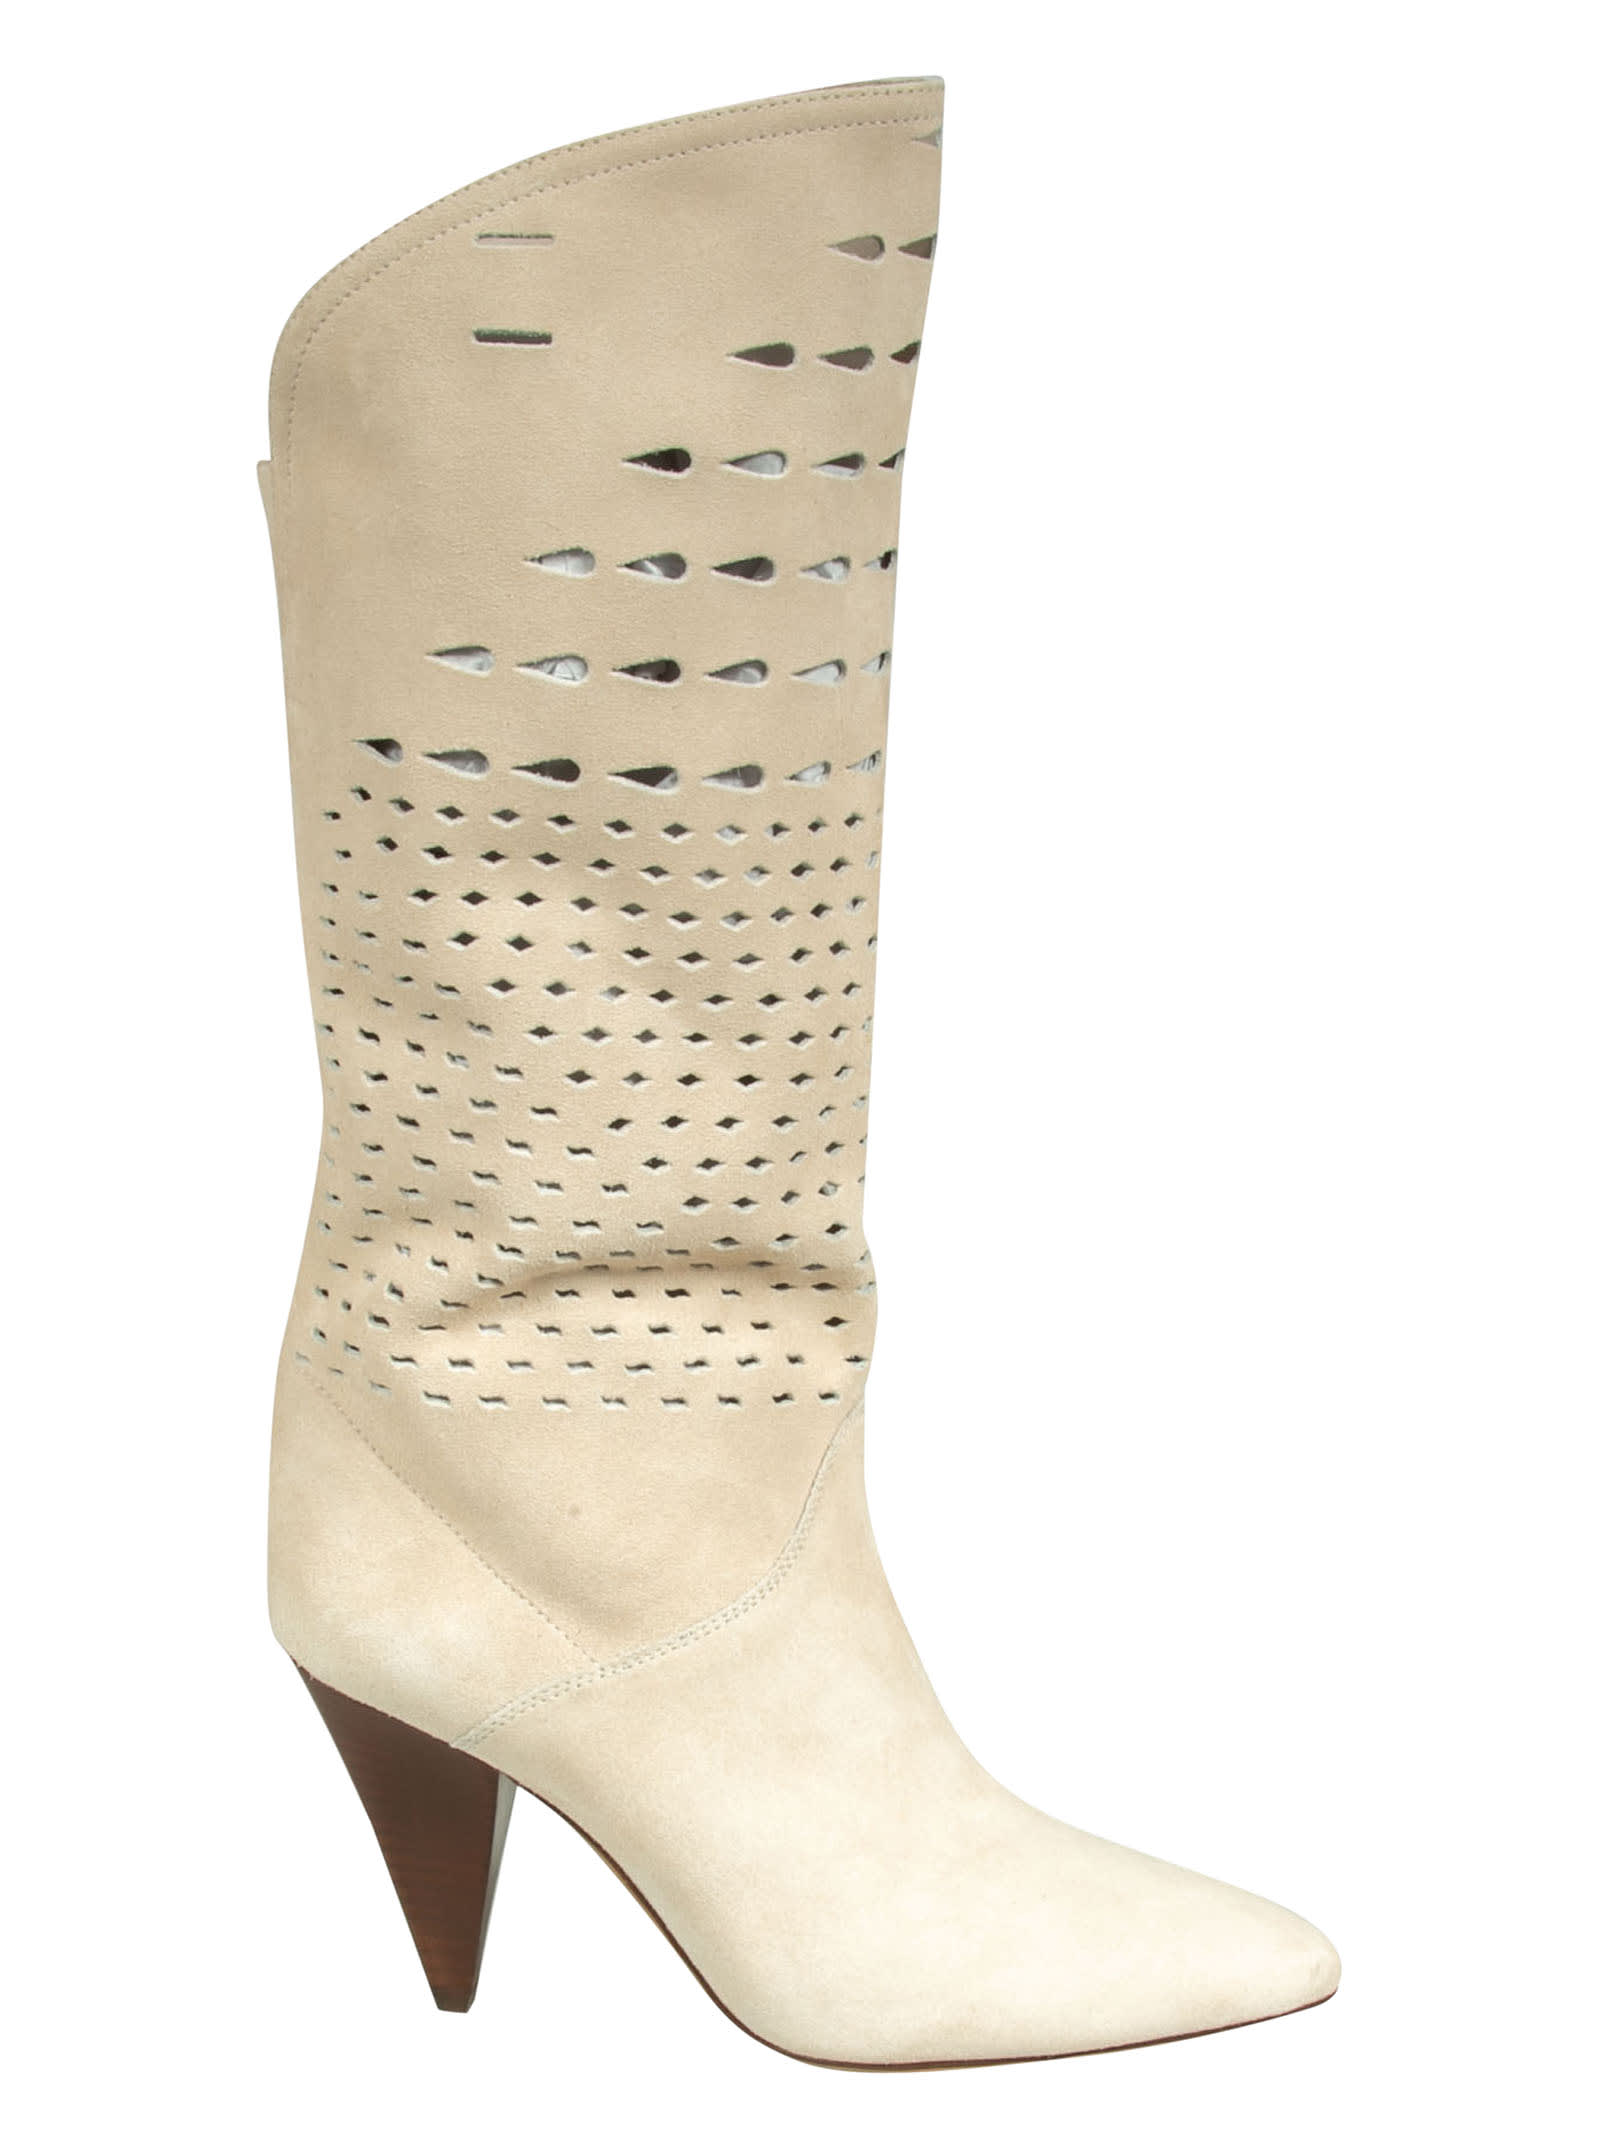 Buy Isabel Marant Perforated Boots online, shop Isabel Marant shoes with free shipping